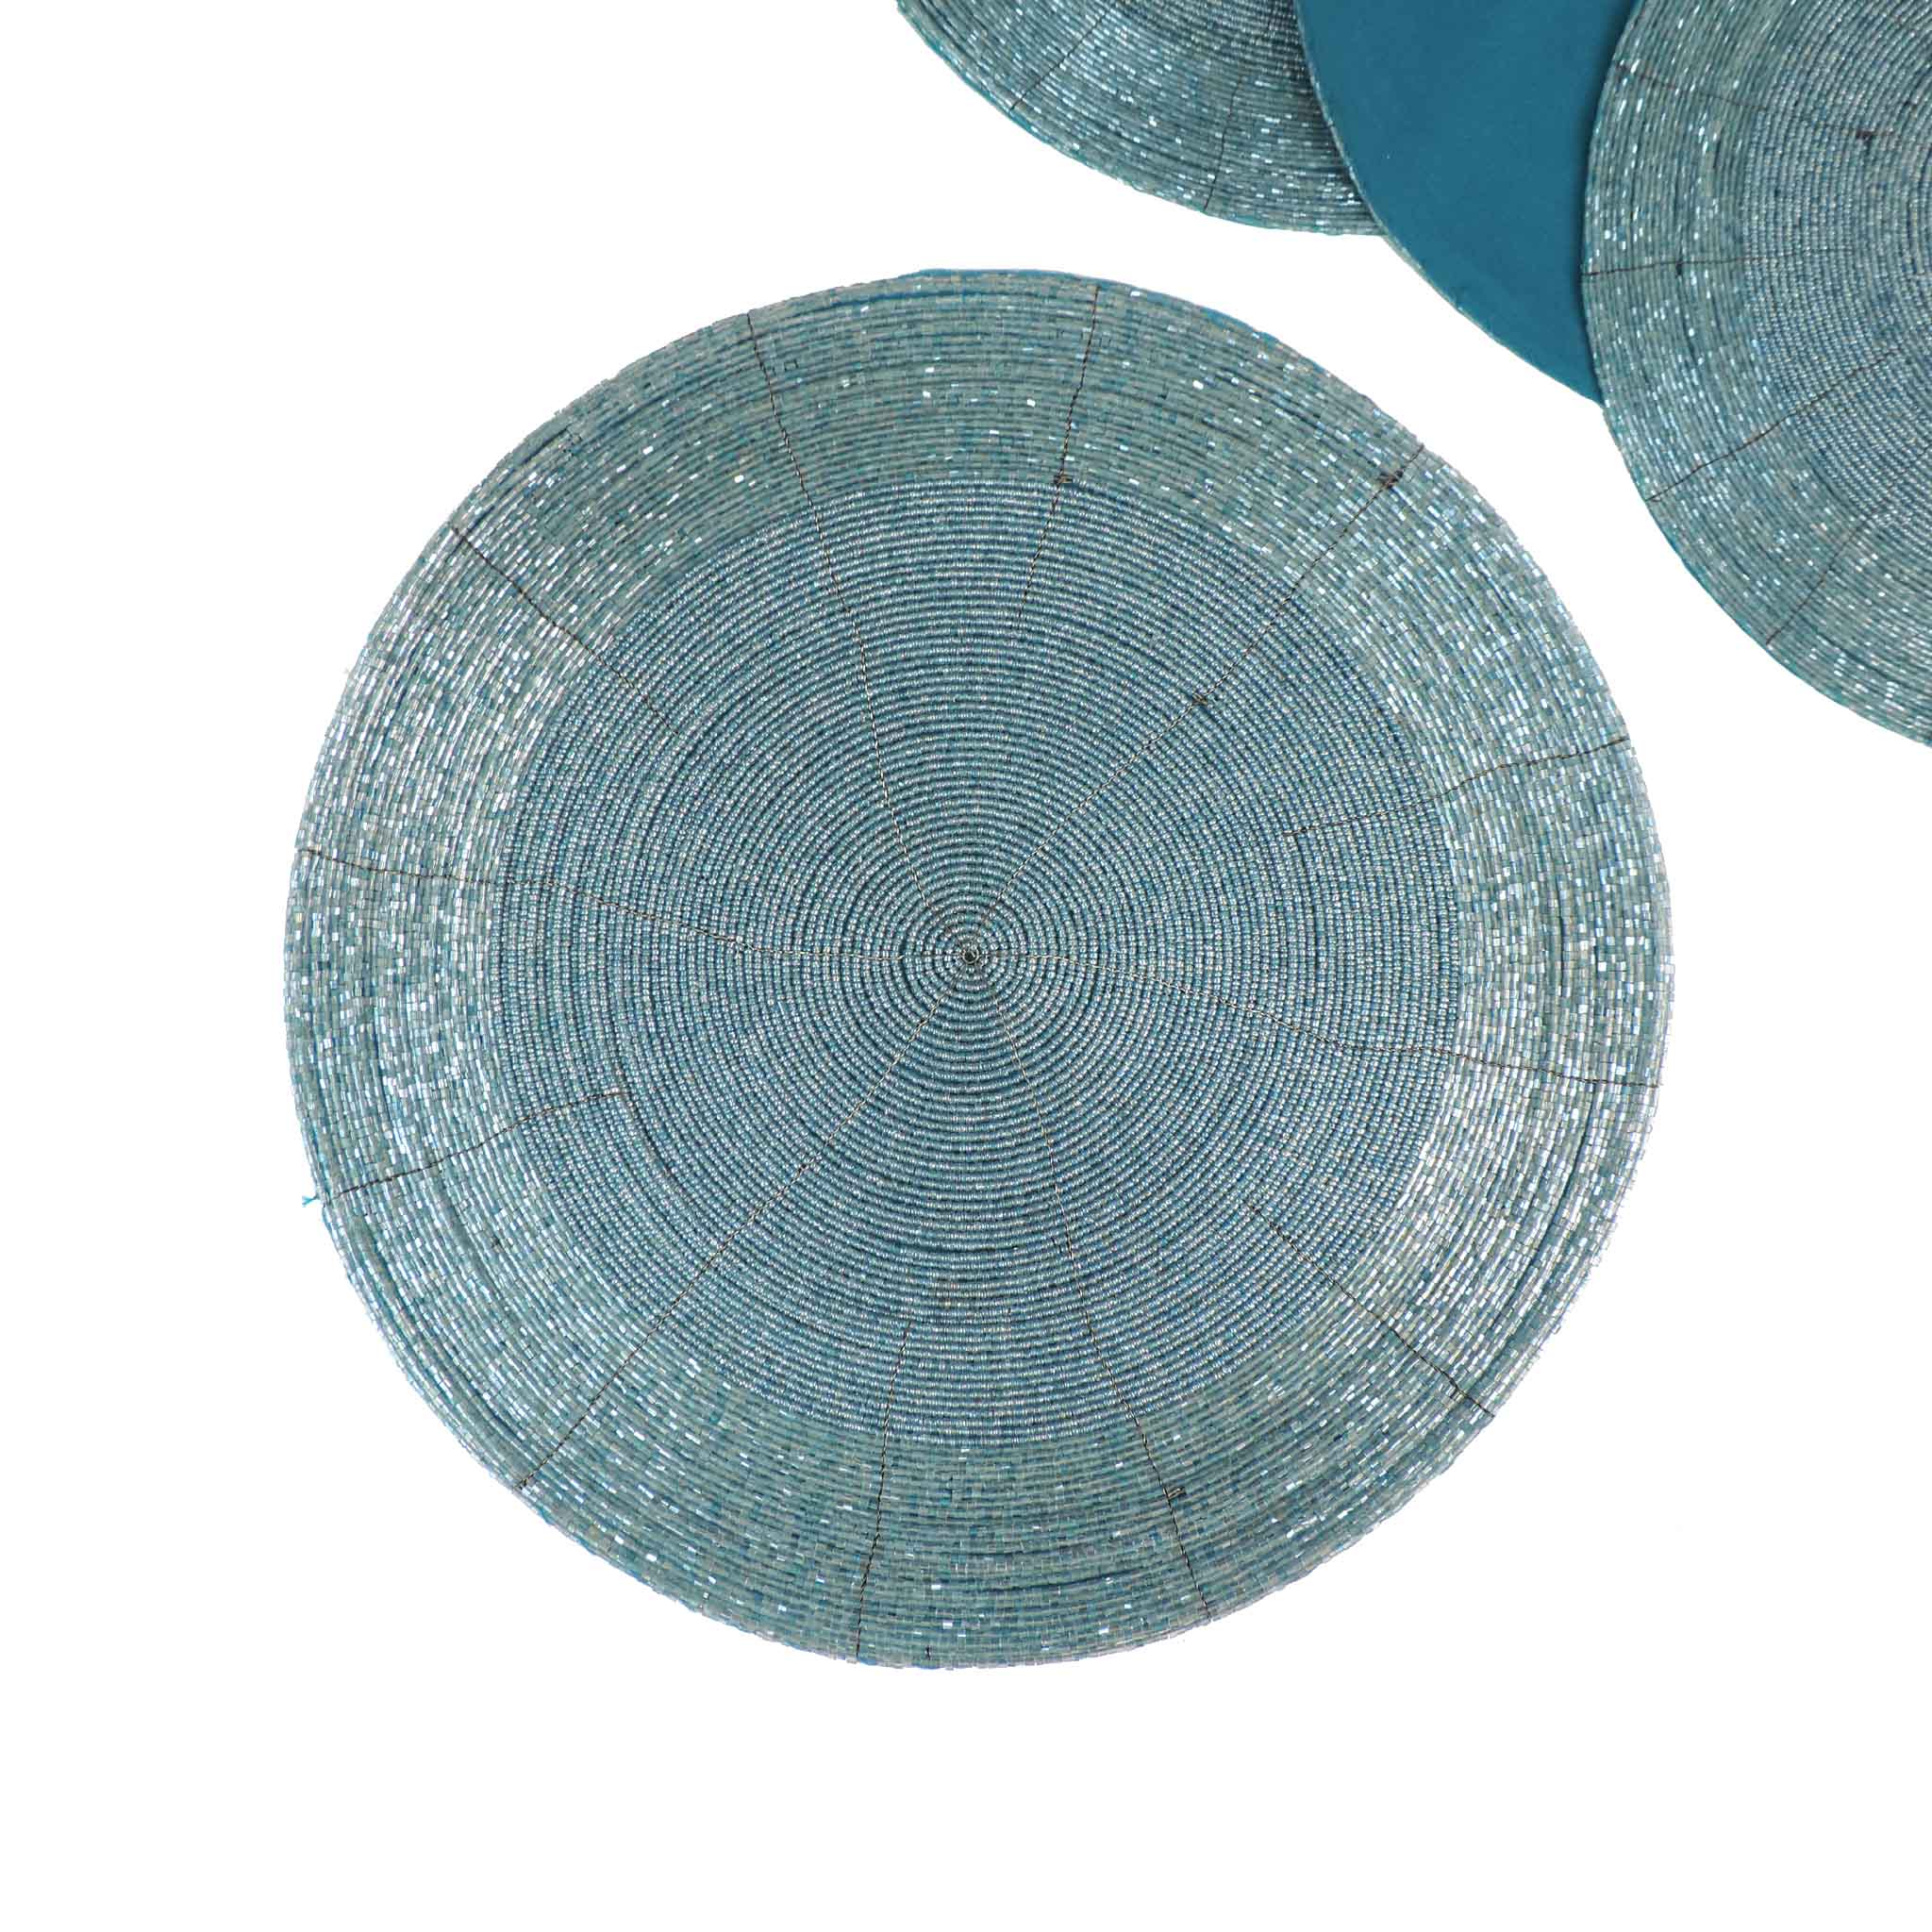 Glass Beaded Placemat in Ice Blue Two-Tone, Set of 4